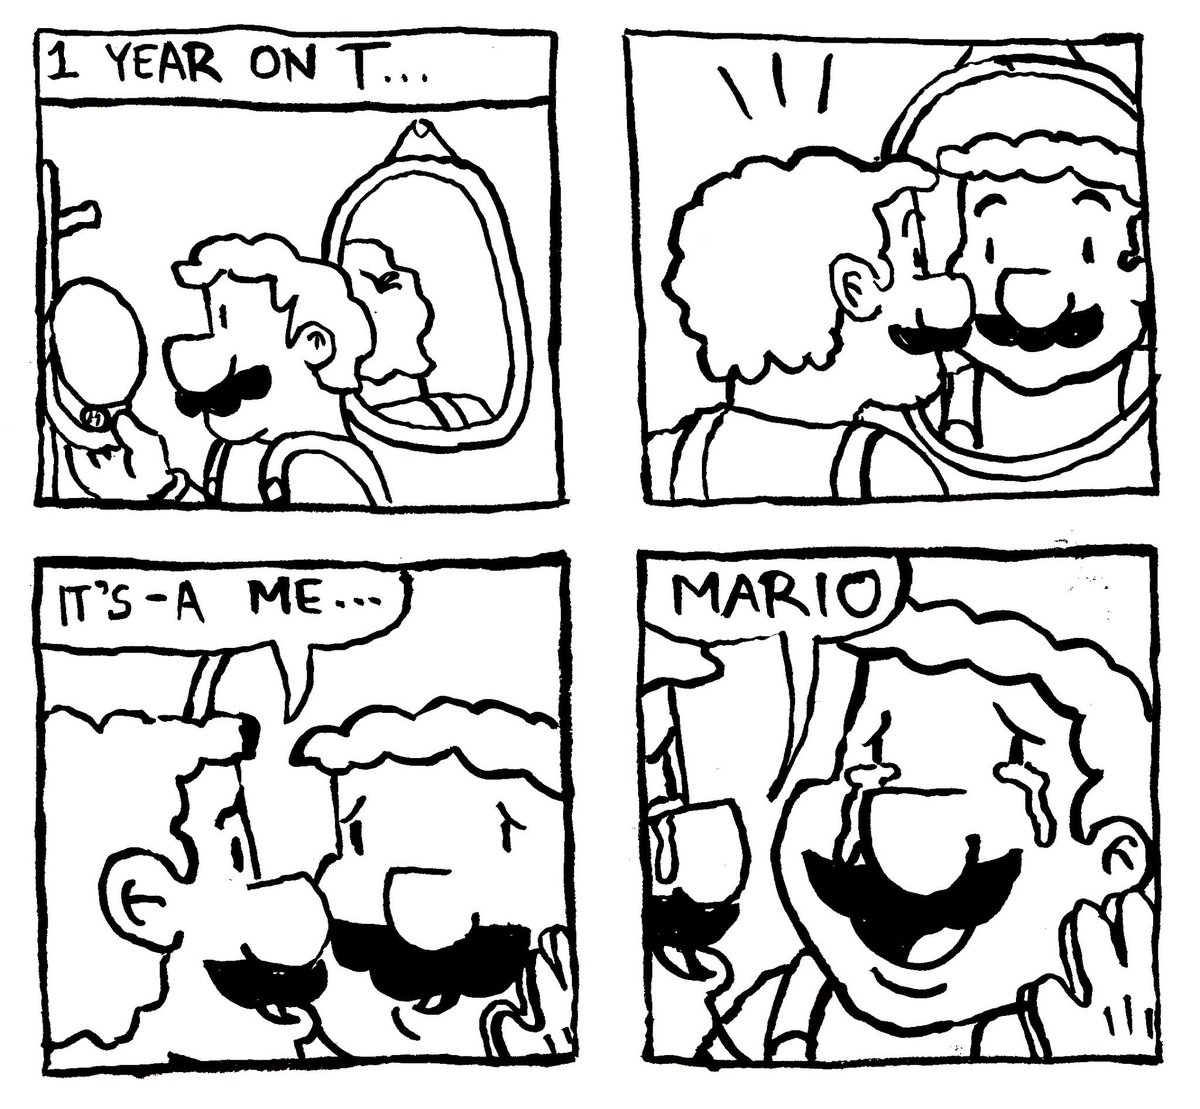 Hunted down this @hausofdecline comic for this